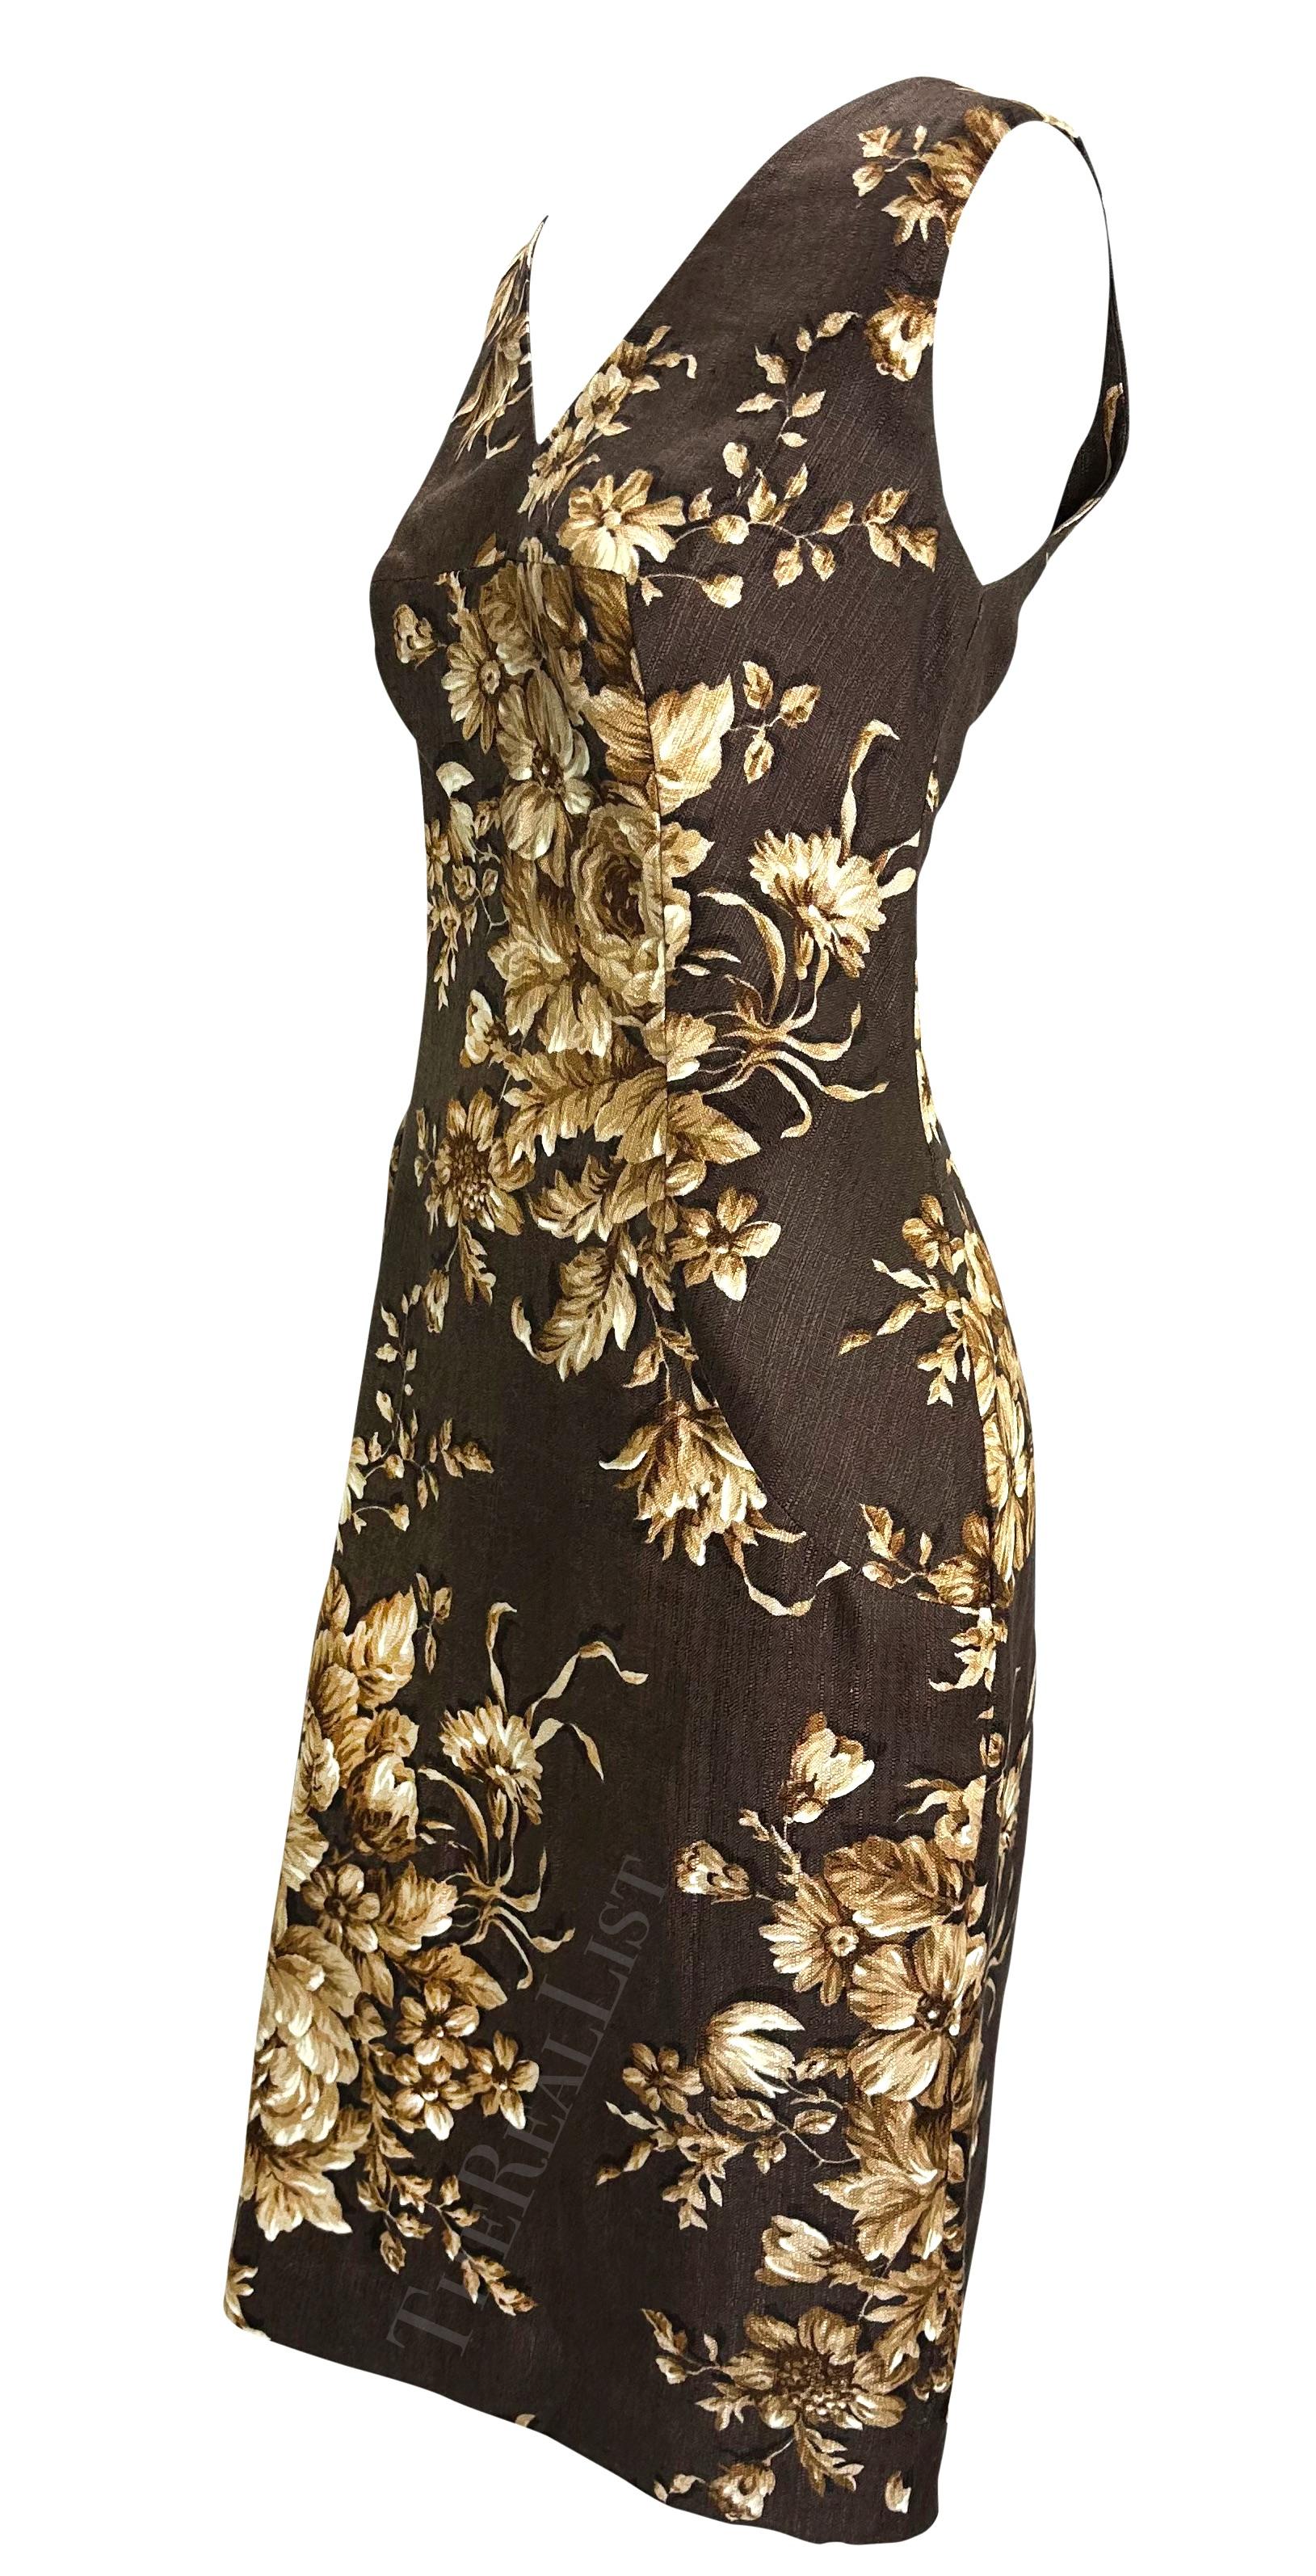 S/S 1997 Dolce & Gabbana Runway Brown Beige Floral Sleeveless Dress In Excellent Condition For Sale In West Hollywood, CA